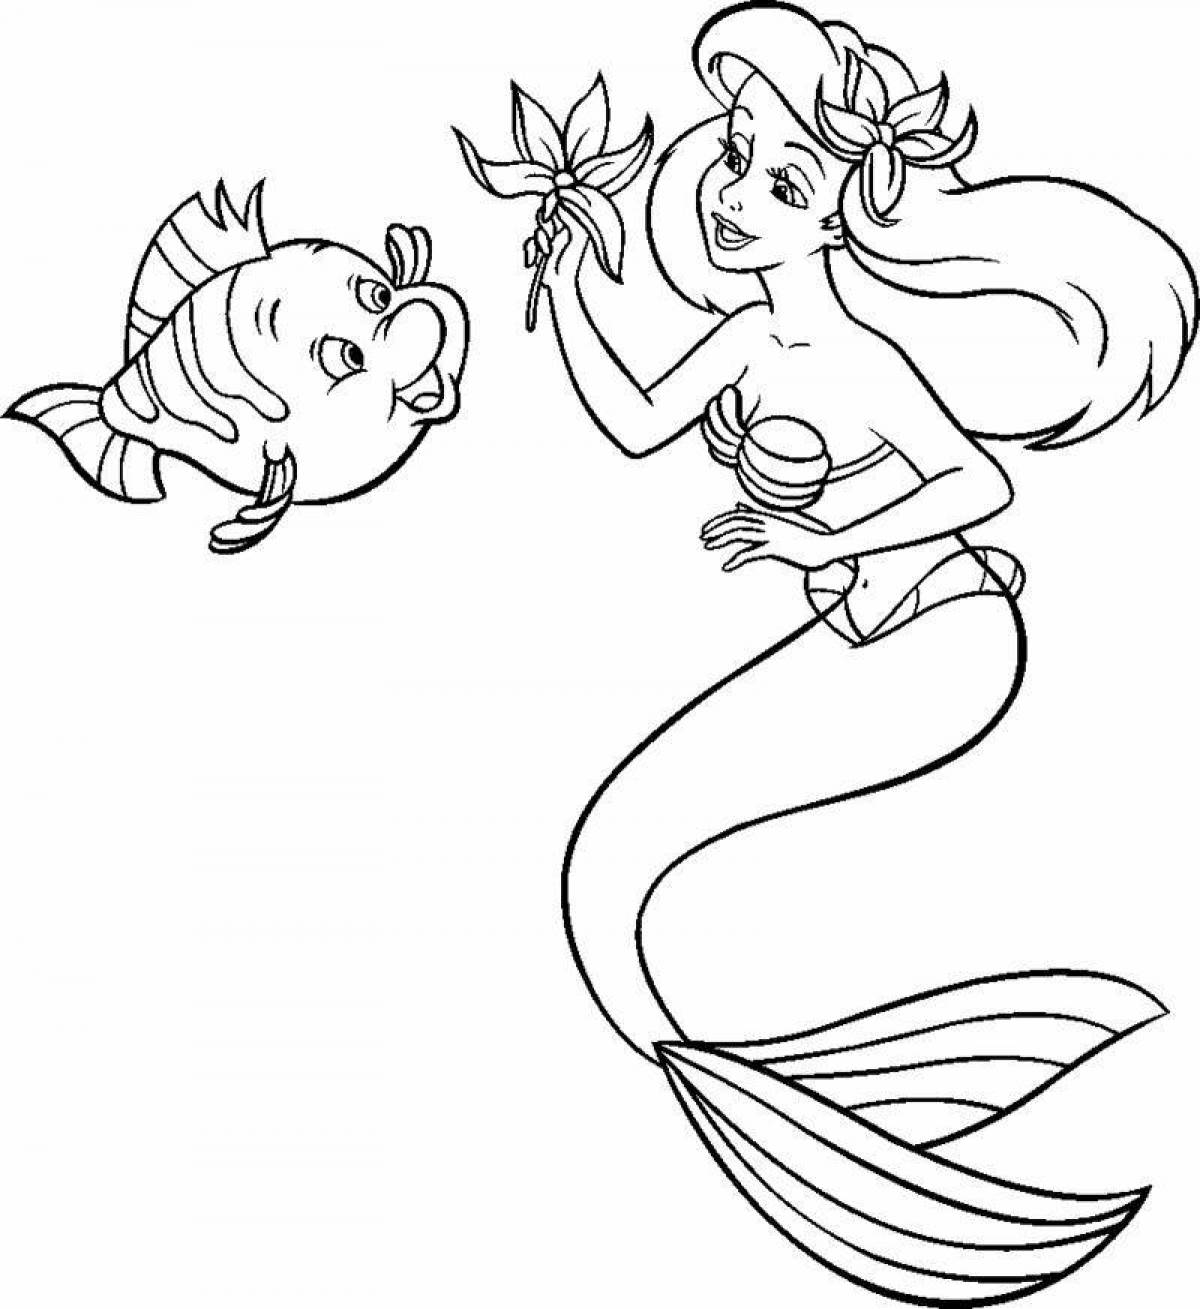 Whimsical mermaid coloring book for 3-4 year olds